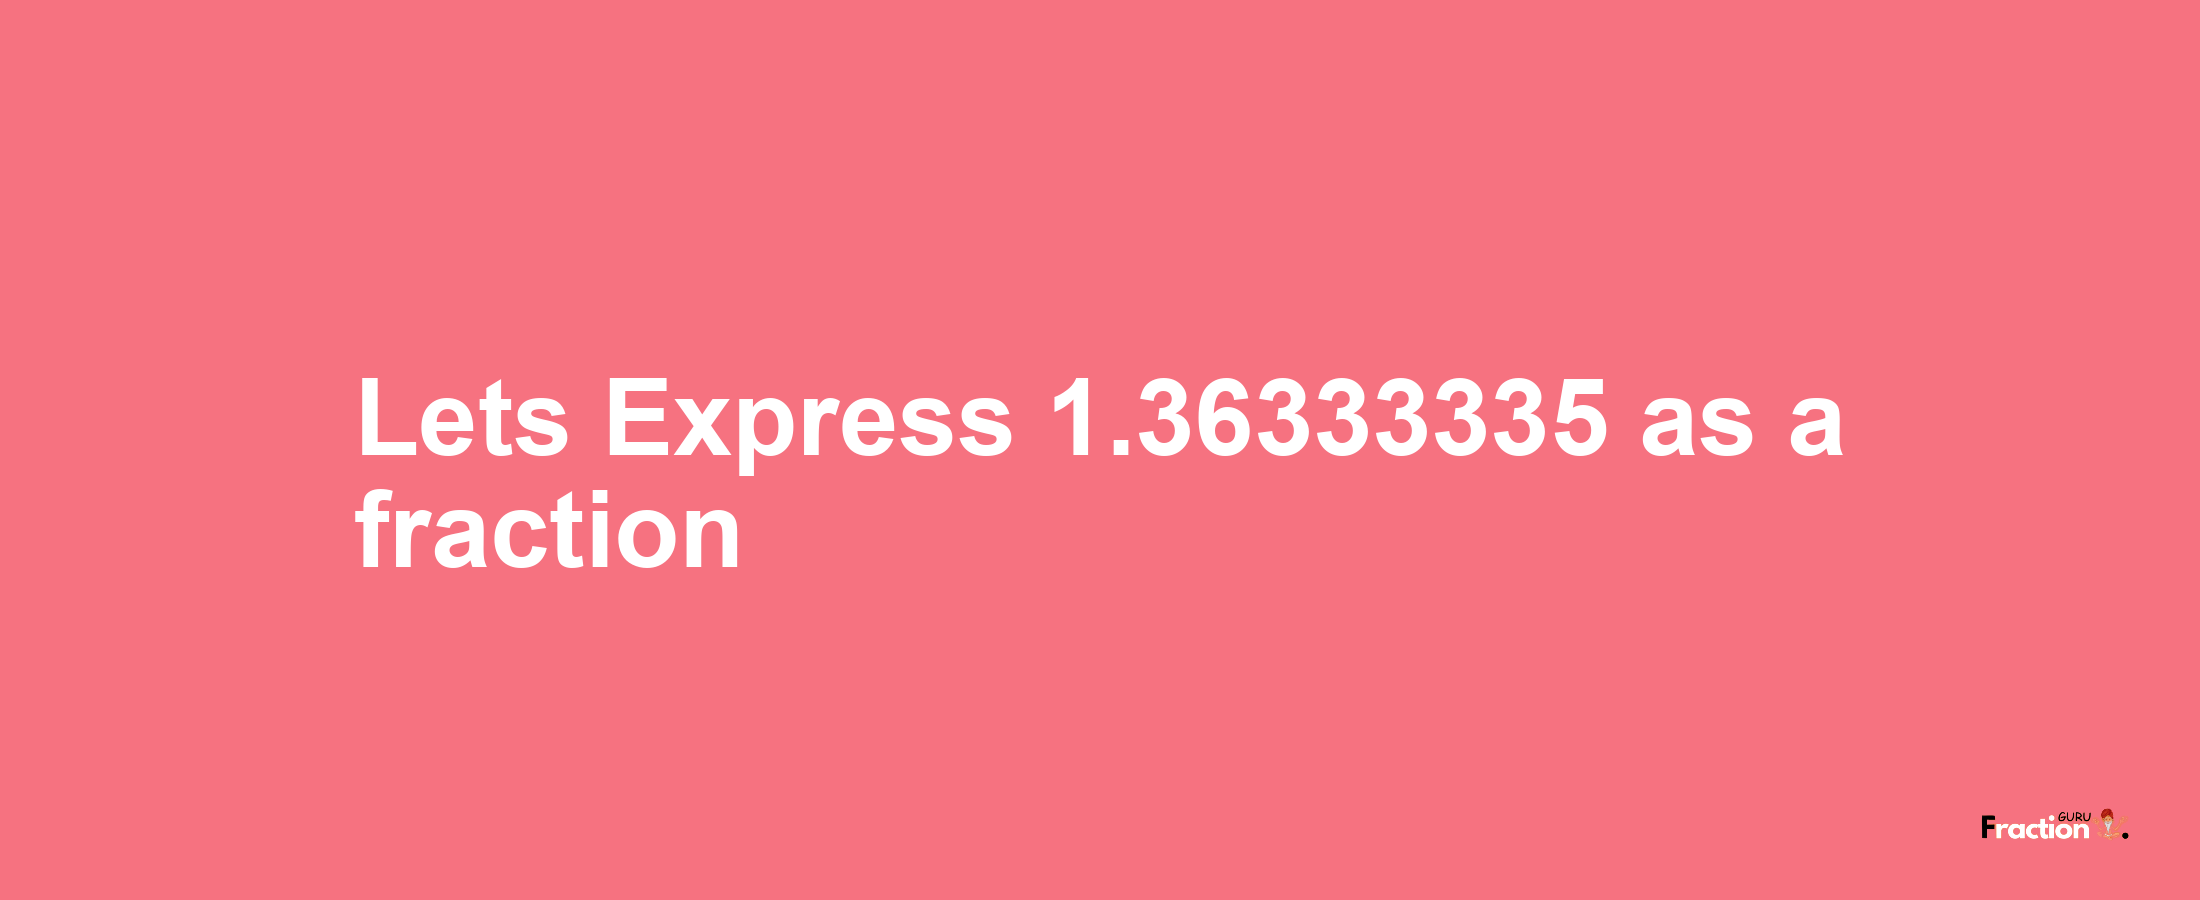 Lets Express 1.36333335 as afraction